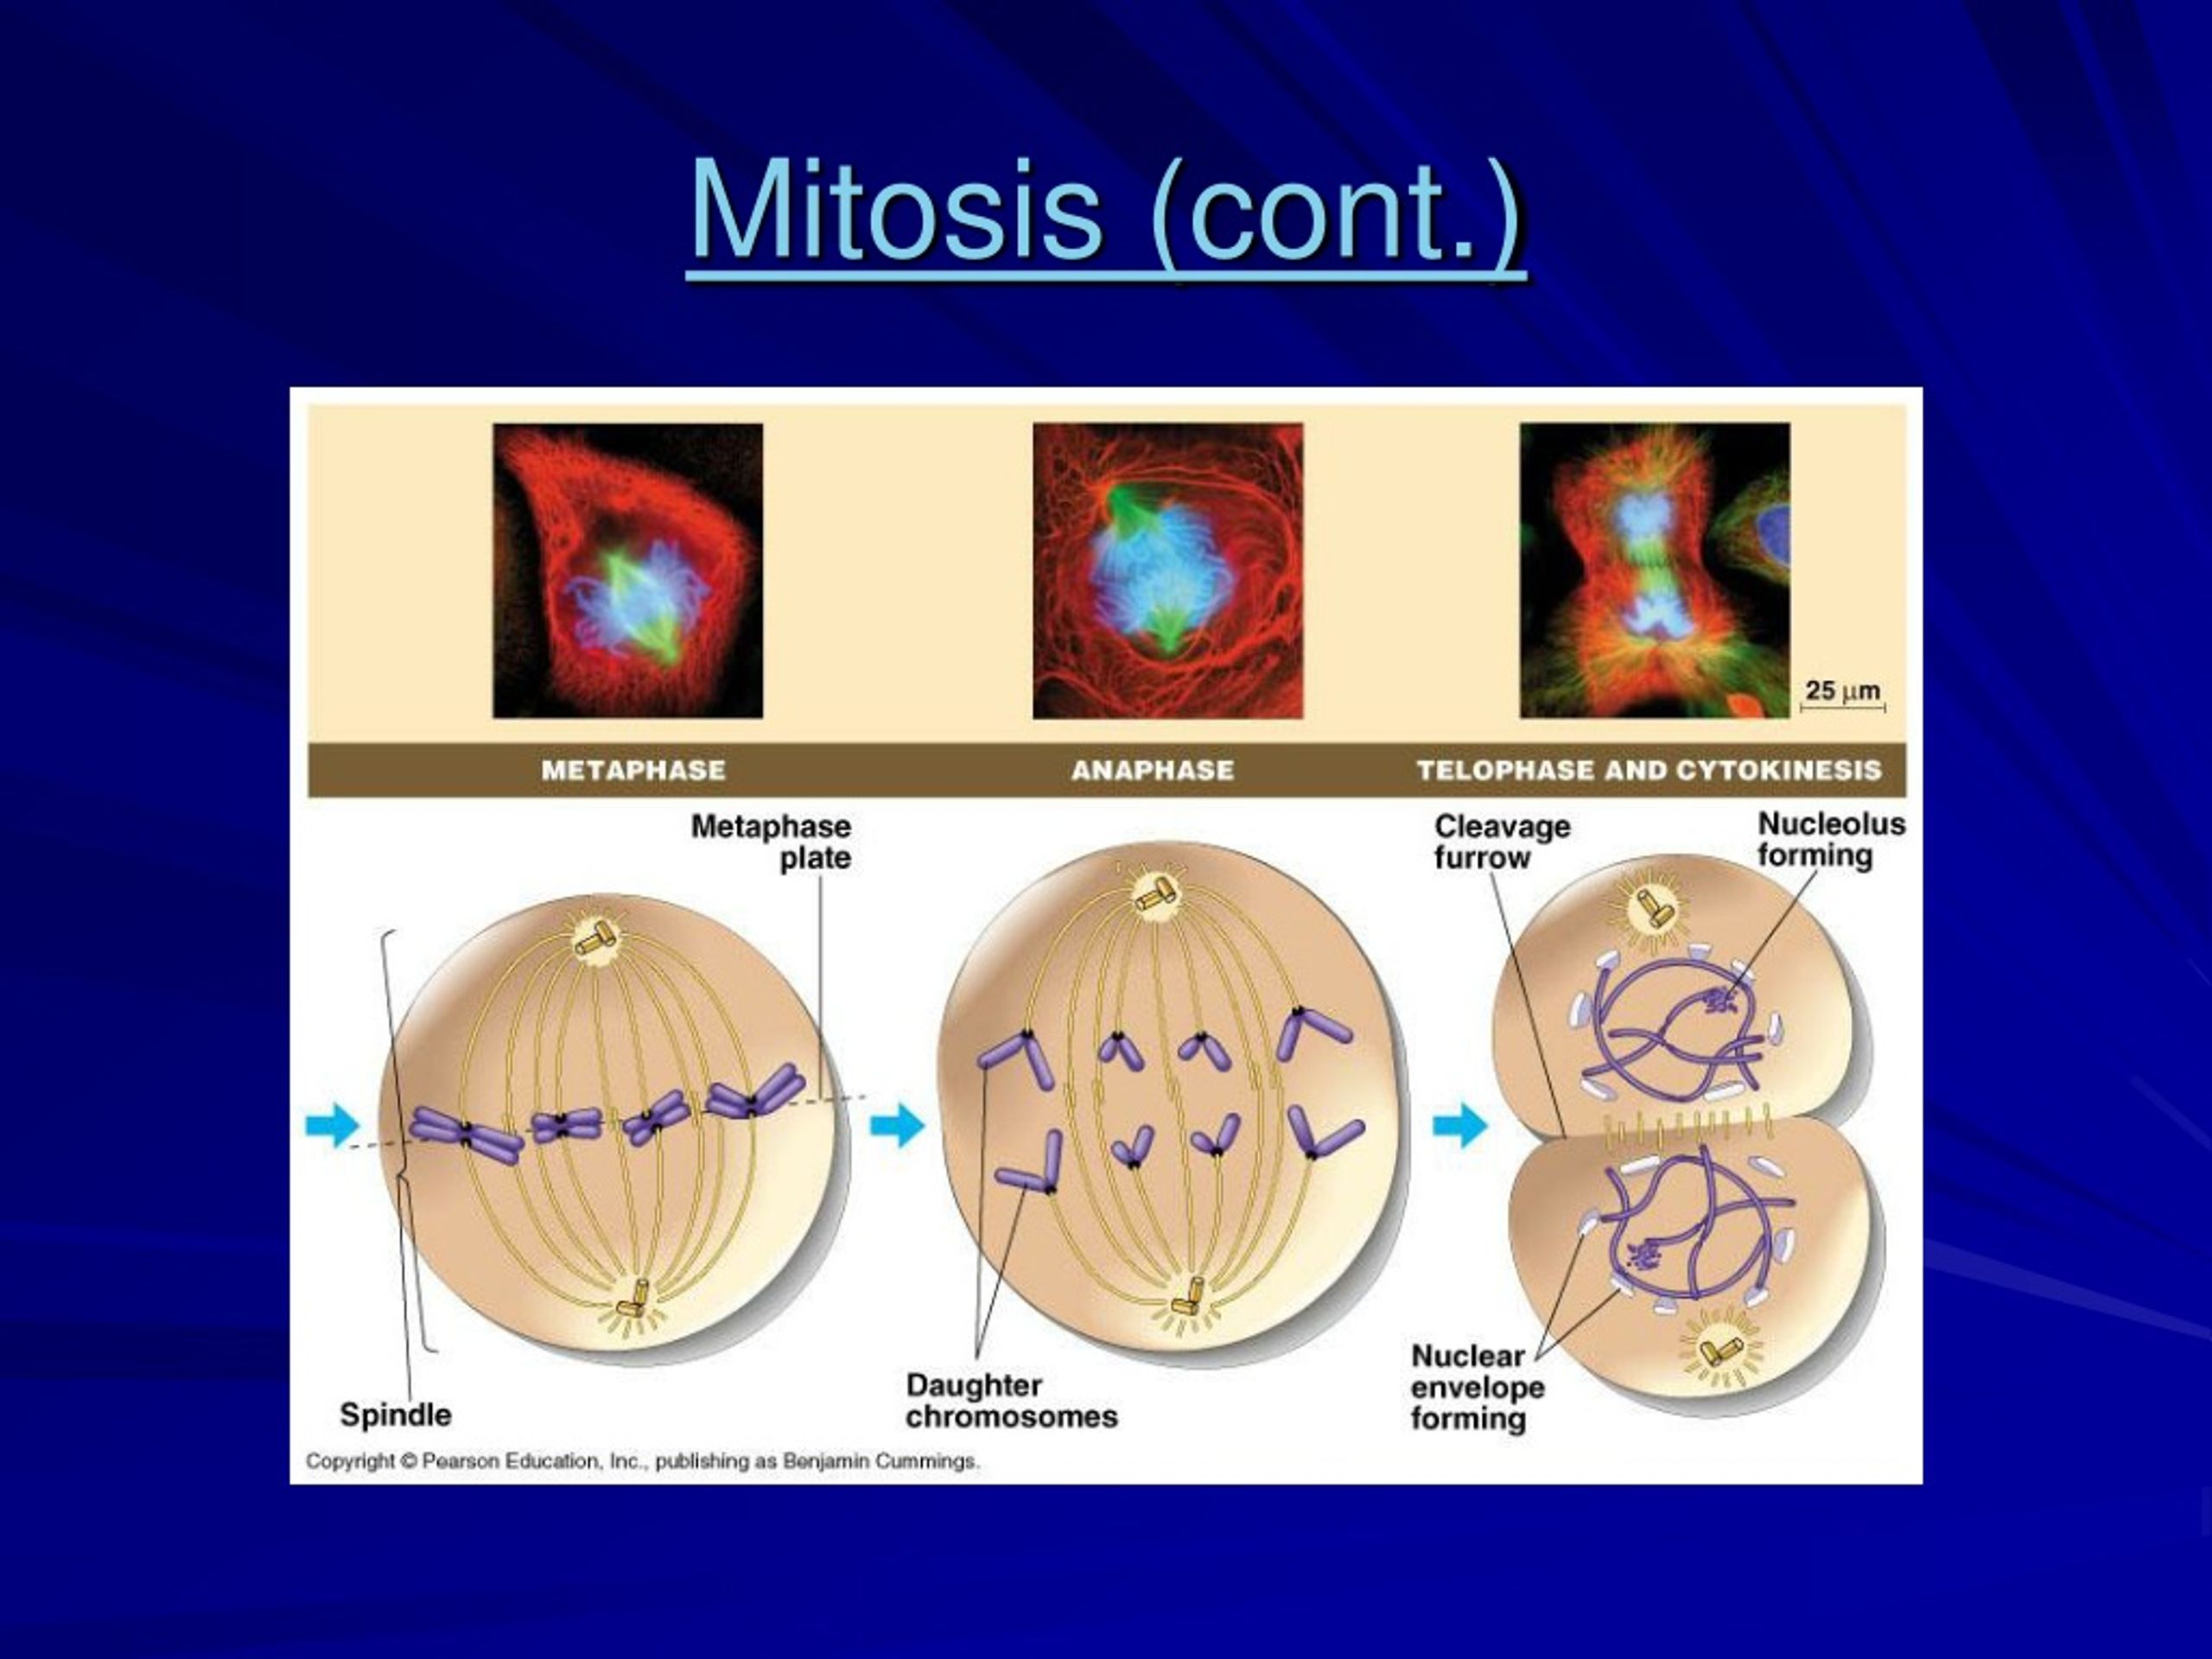 Ppt Mitosis Powerpoint Presentation Free Download Id9249729 2914